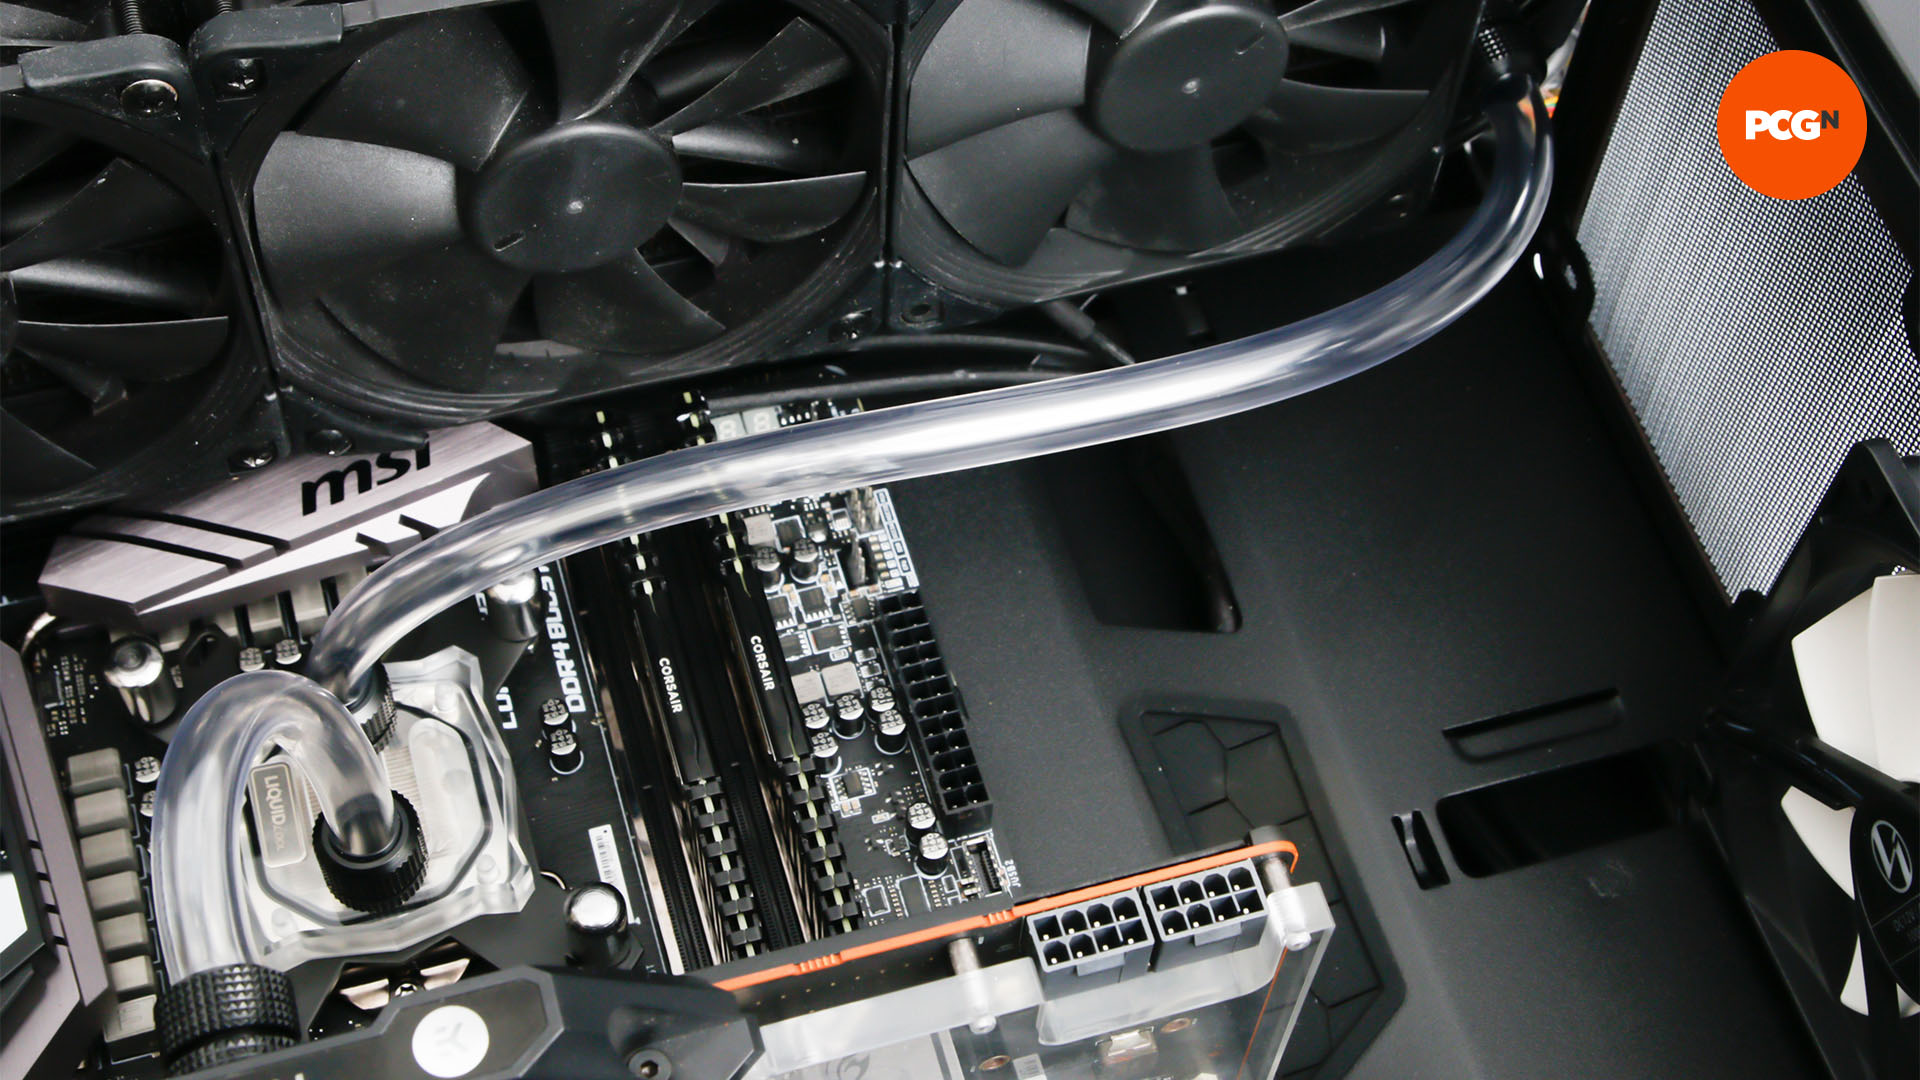 How to water cool your PC: Route tubing from radiator